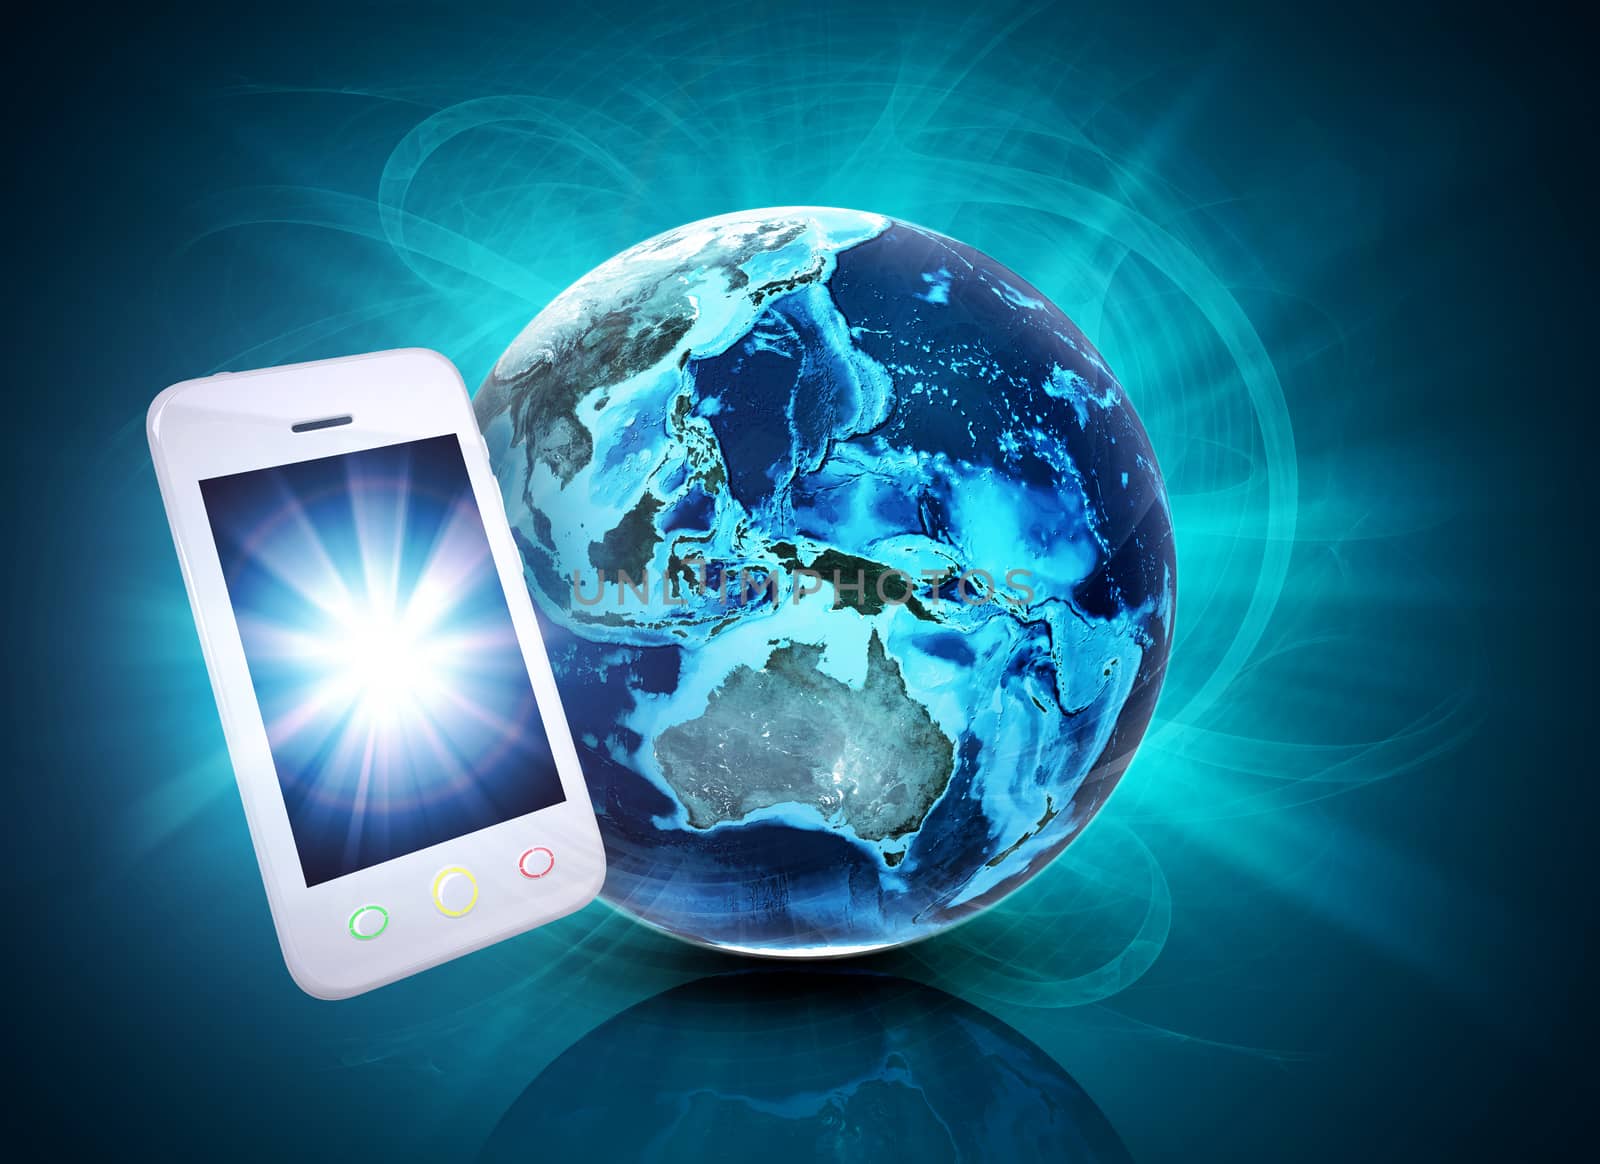 Mobile phone in front of earth on abstract blue background. Elements of this image furnished by NASA